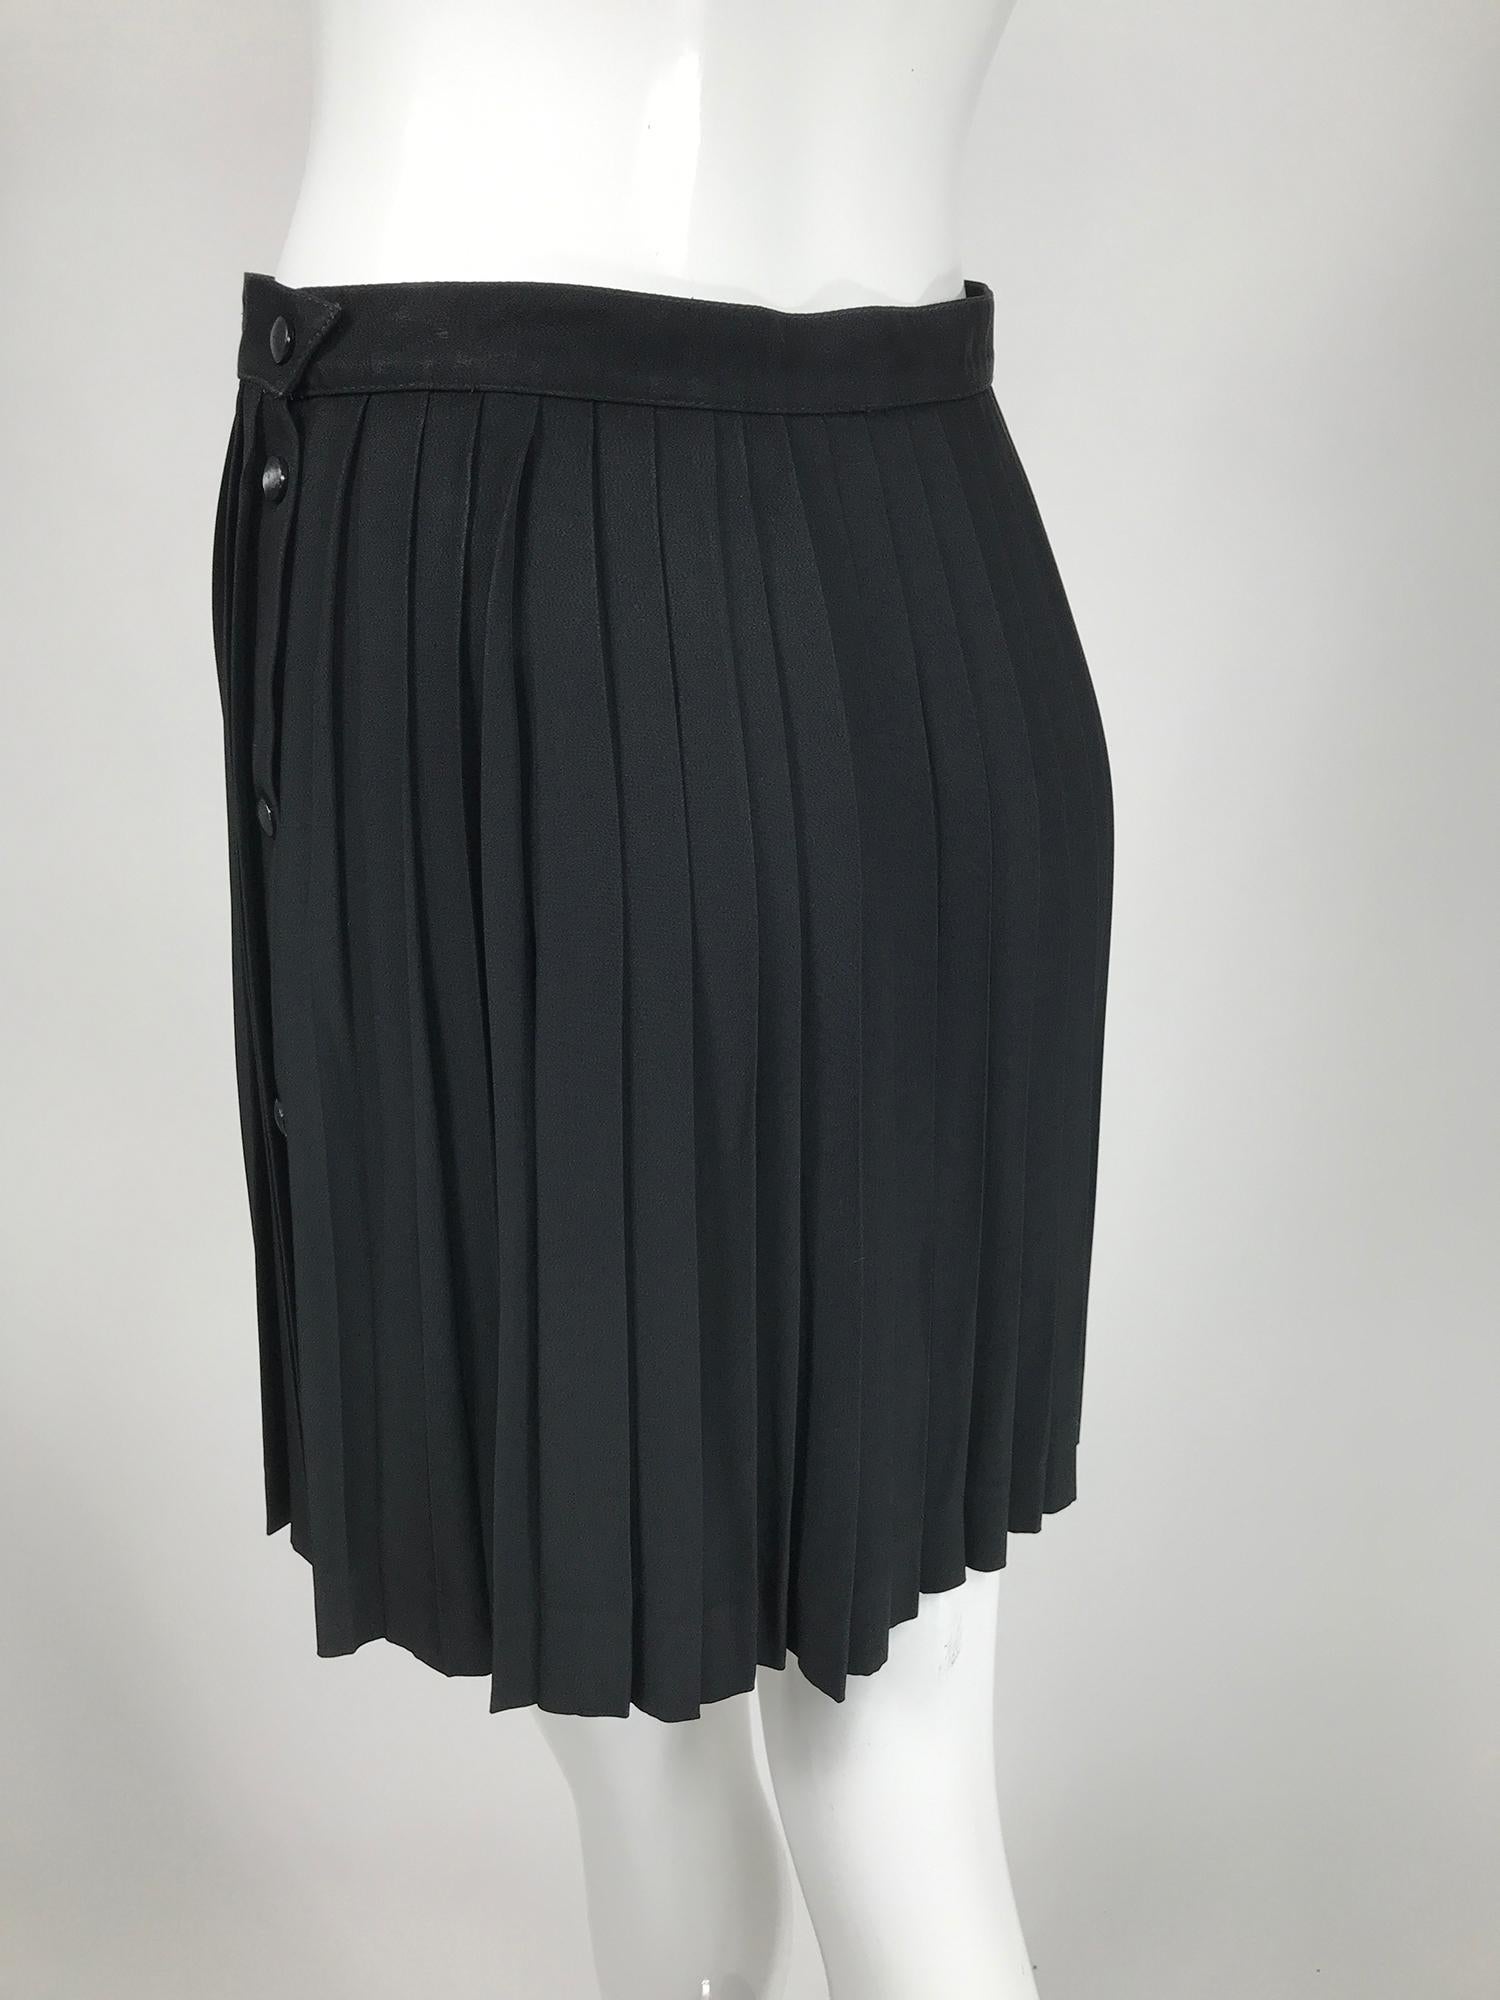 Thierry Mugler Black Crepe Side Snap Pleated Mini Skirt 1980s For Sale 1